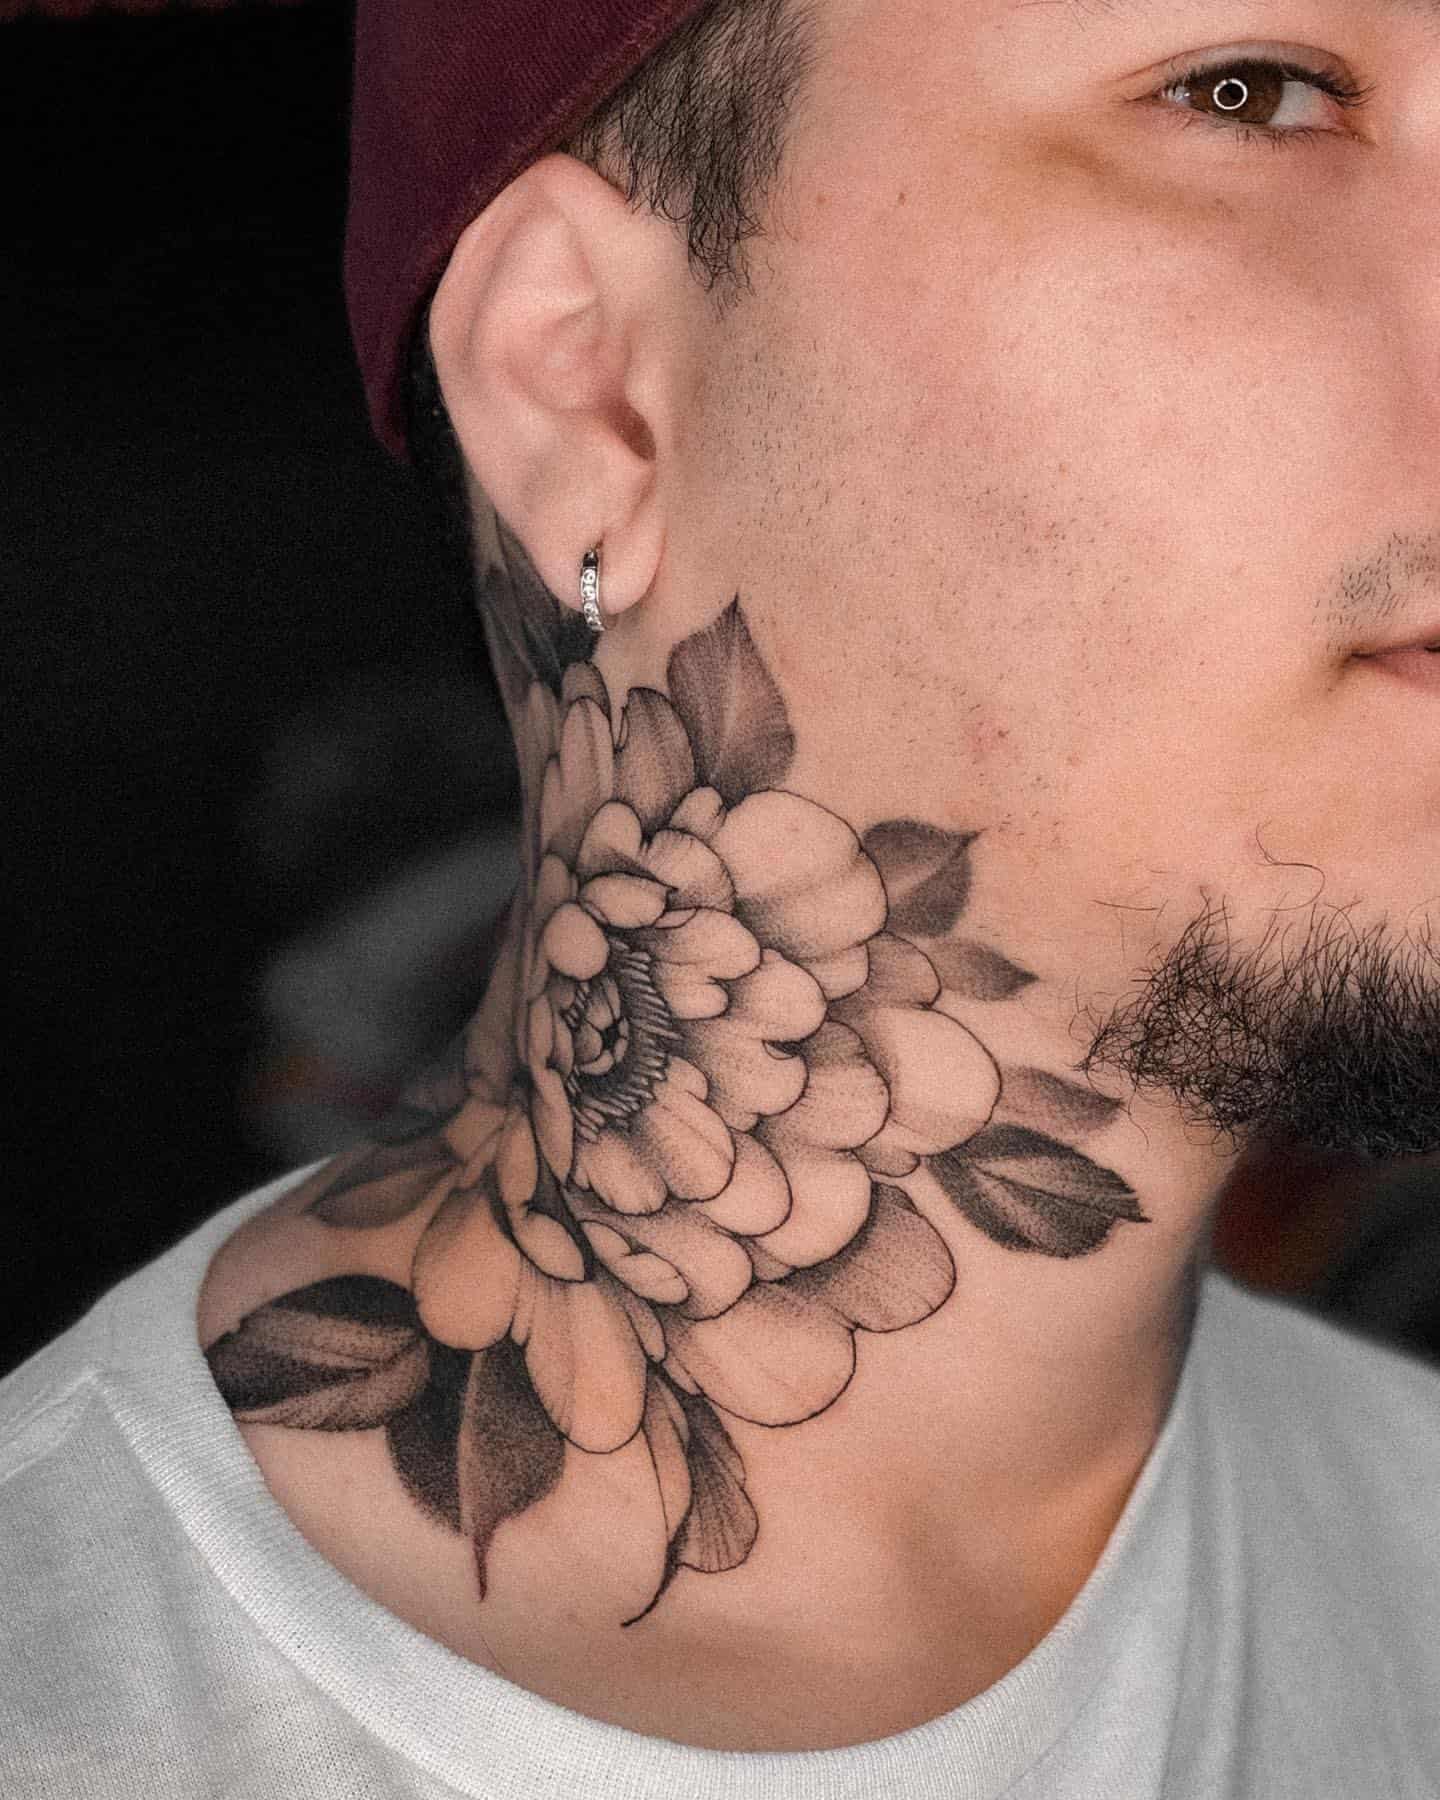 Japanese Tattoo Model With Neck Tattoos Tokyo Fashion